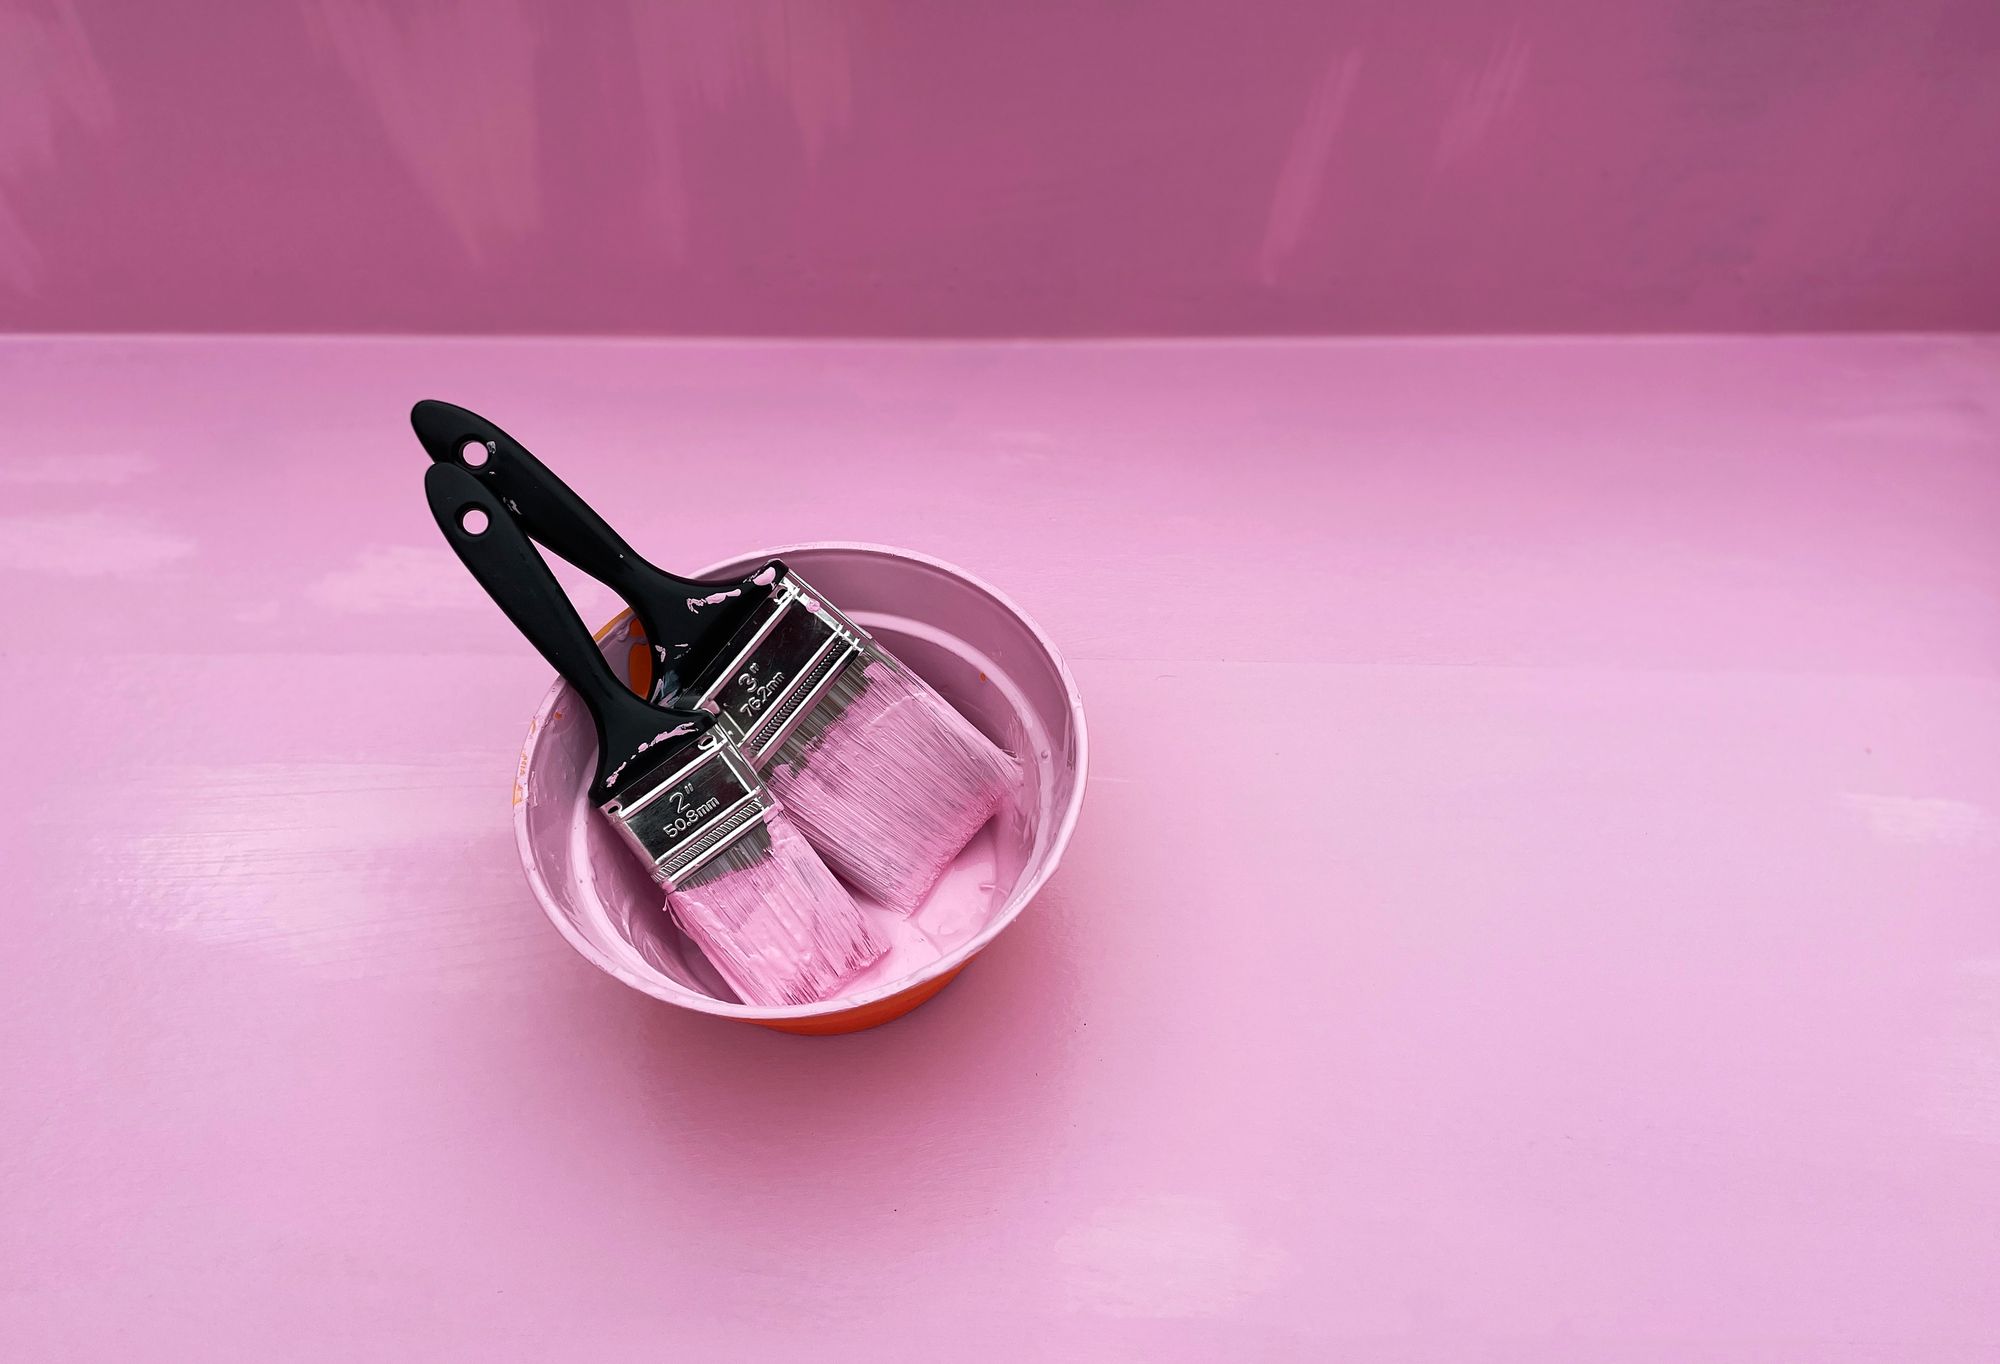 Stock photo of pink paint brushes.